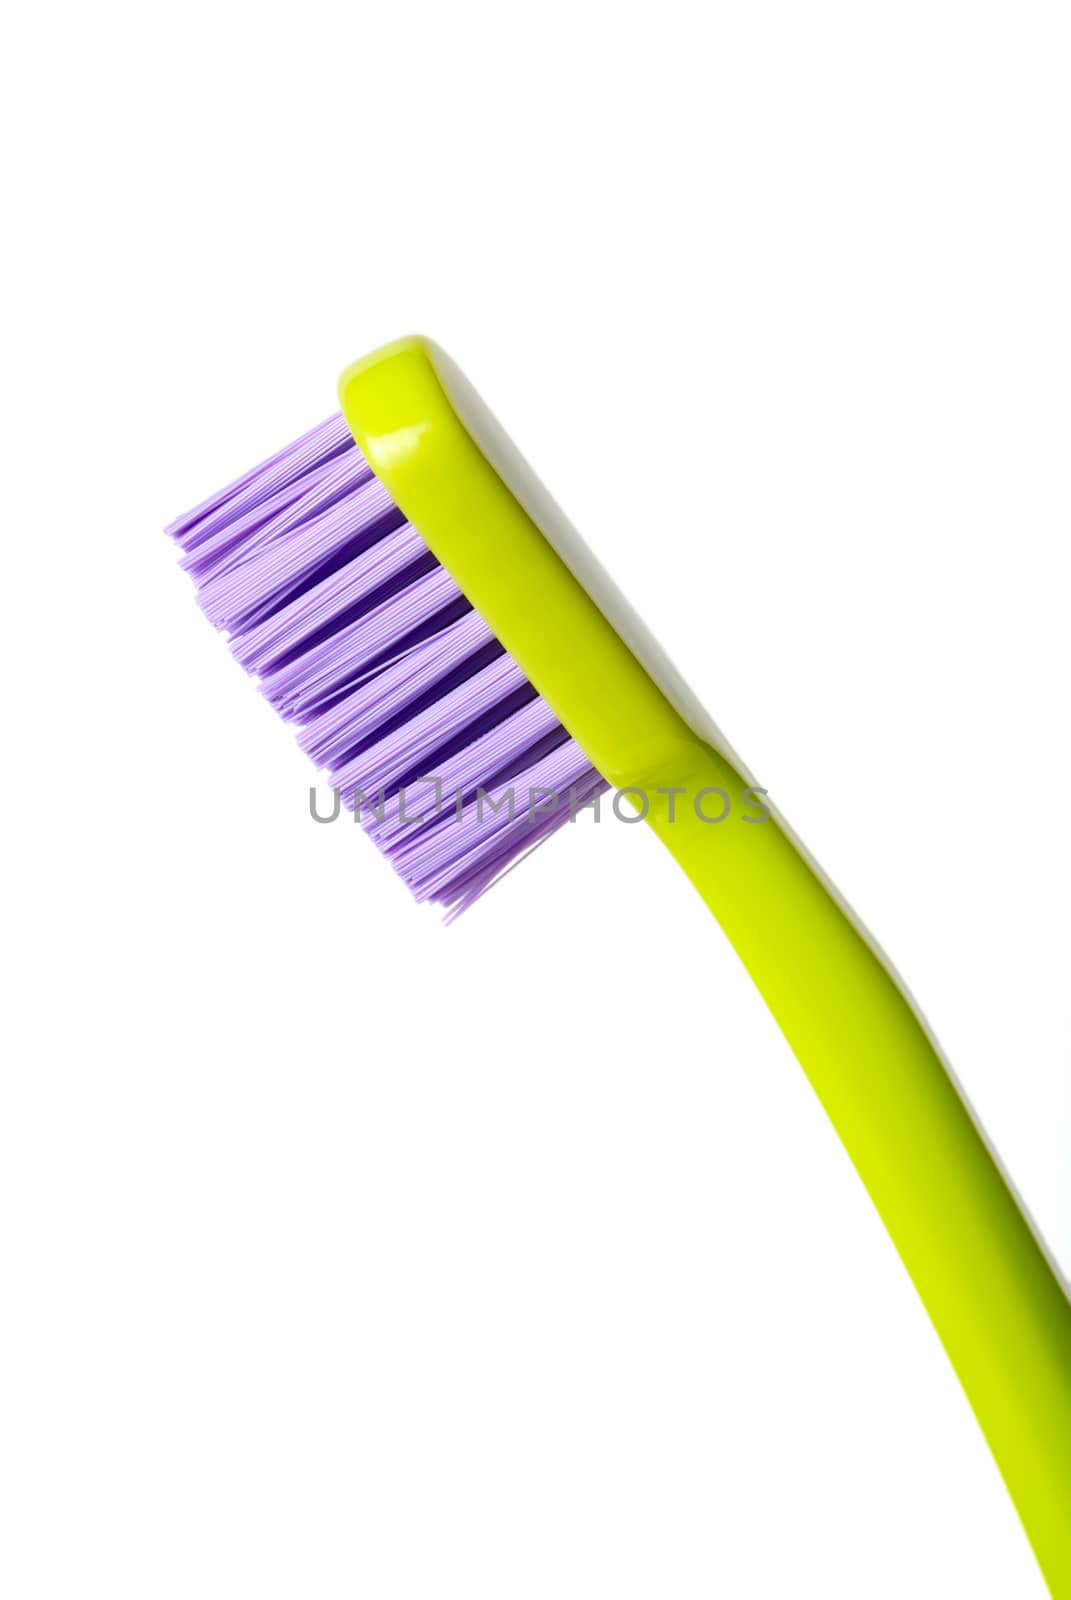 Colored toothbrush diagonally isolated on white background